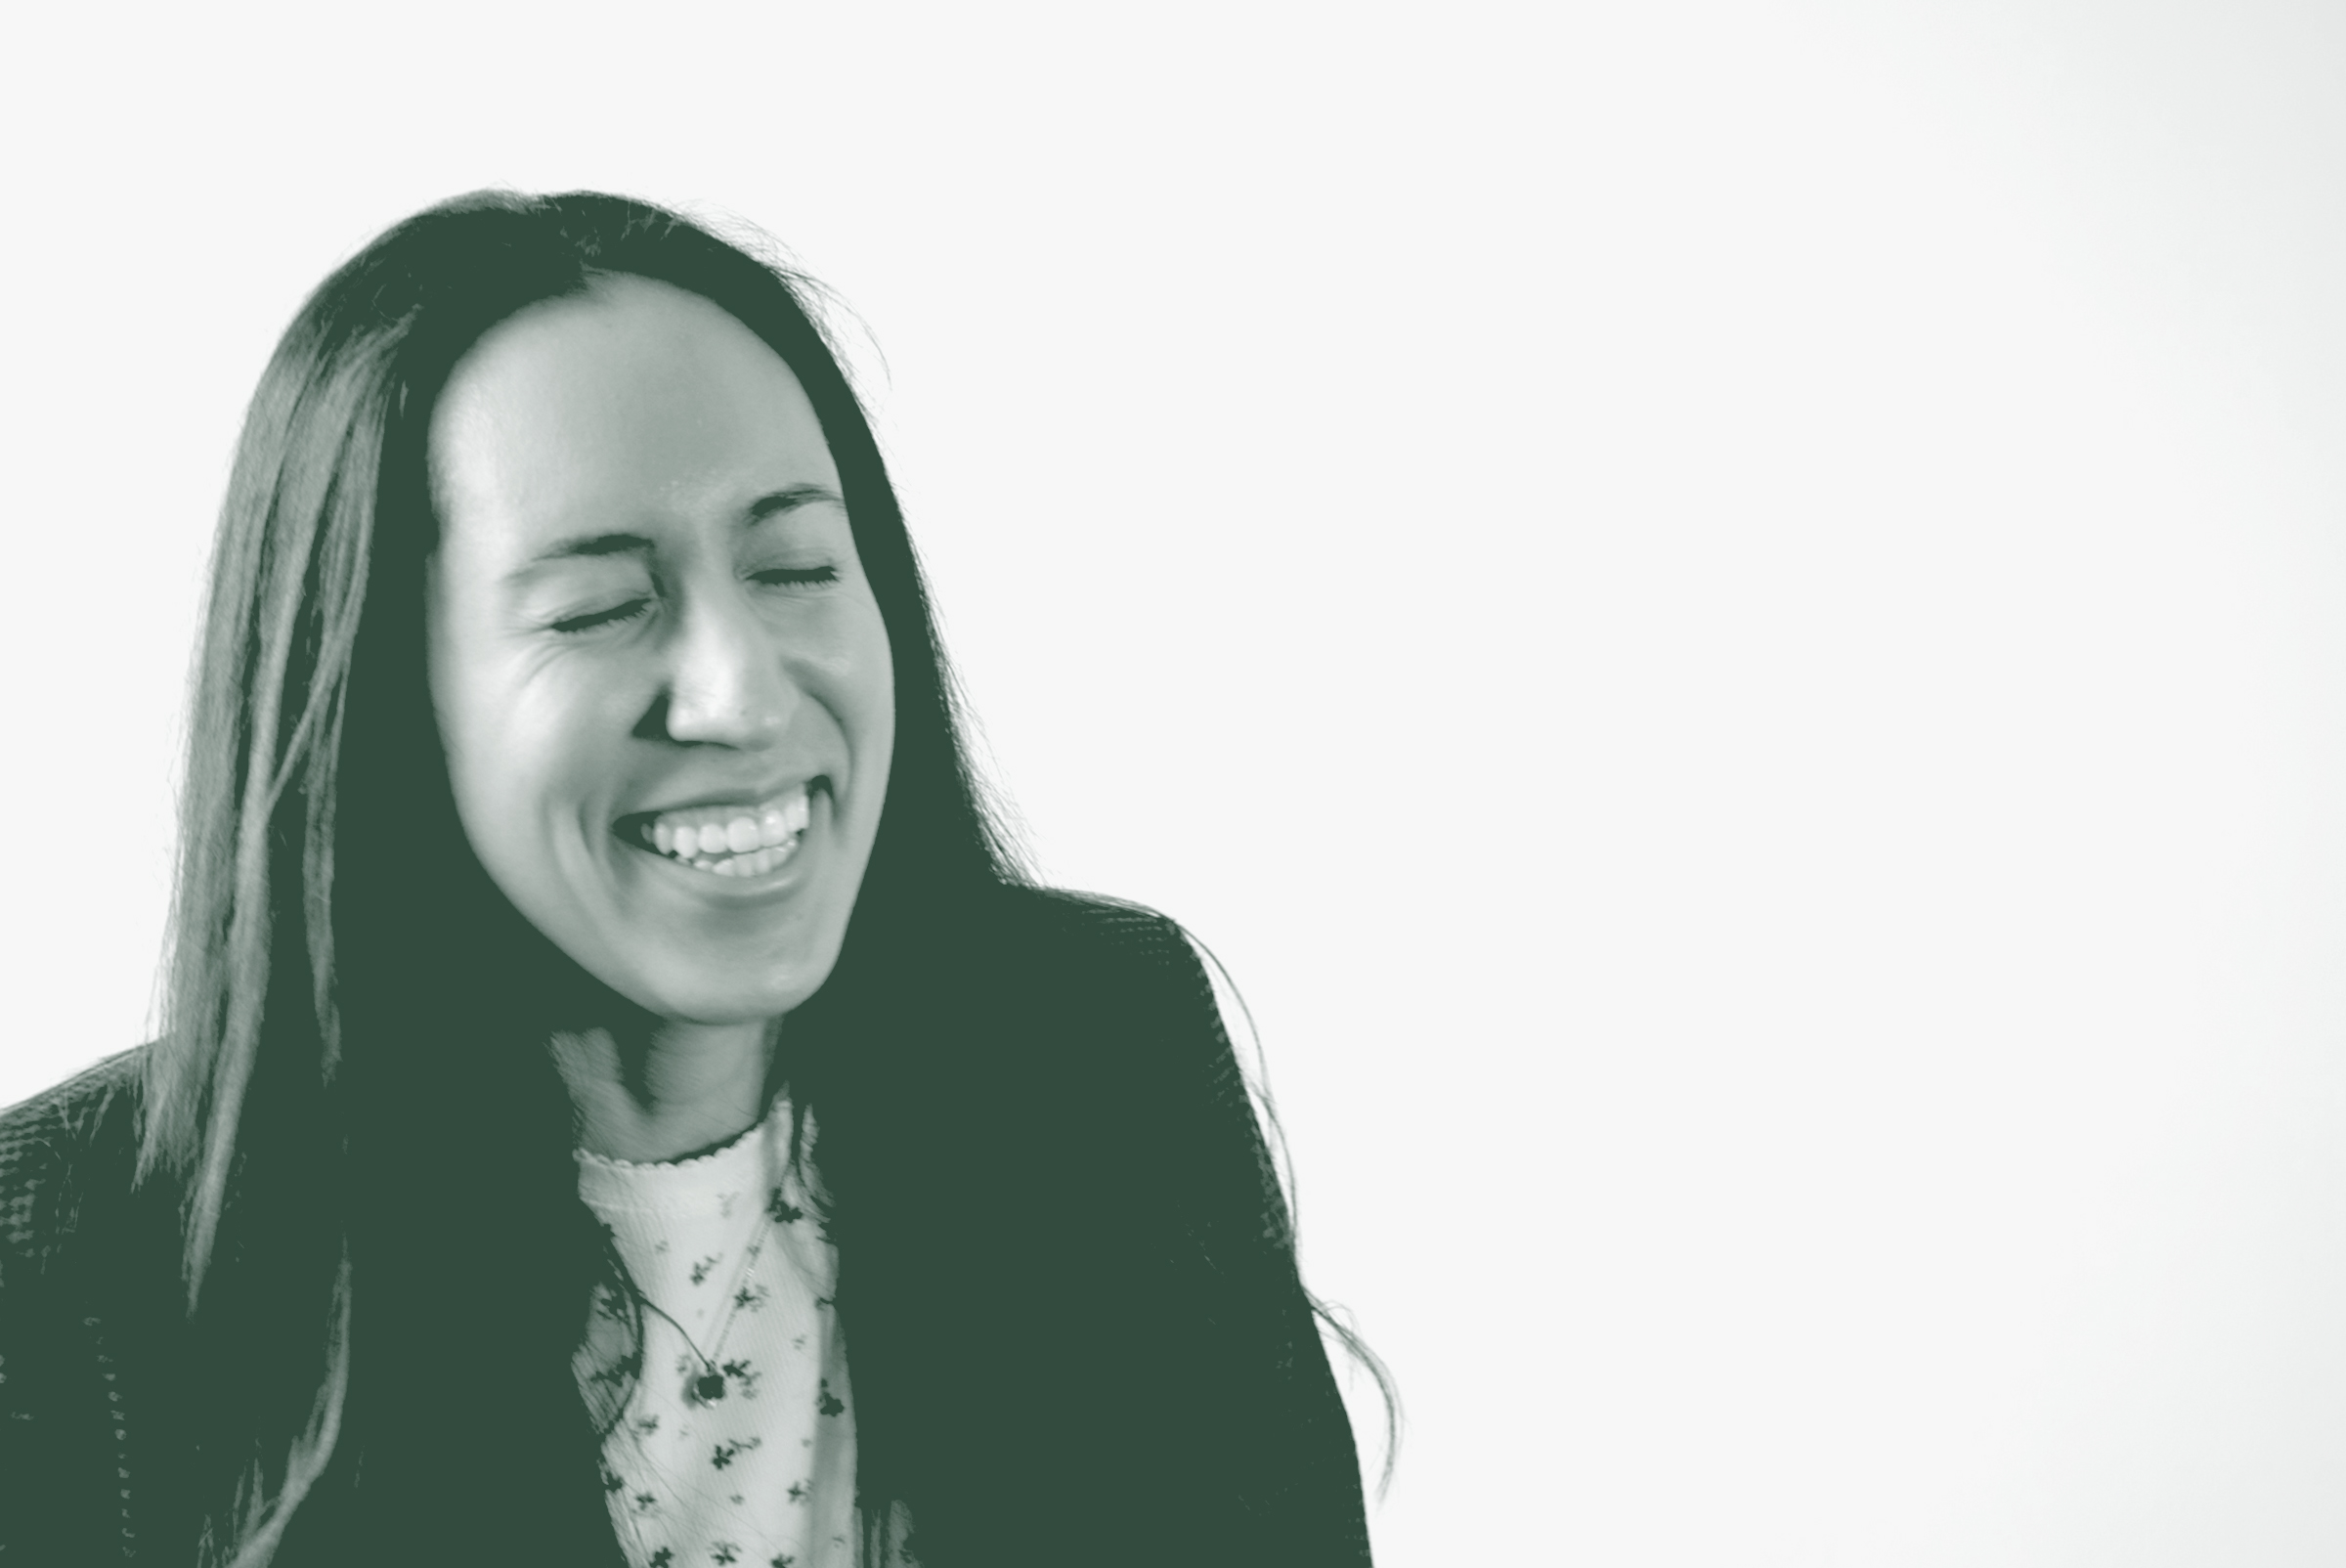 A black and white portrait of Marisa Dominguez, an Architectural Professional with GFF in the Mixed-Use & Multifamily Studio, in front of a white background.